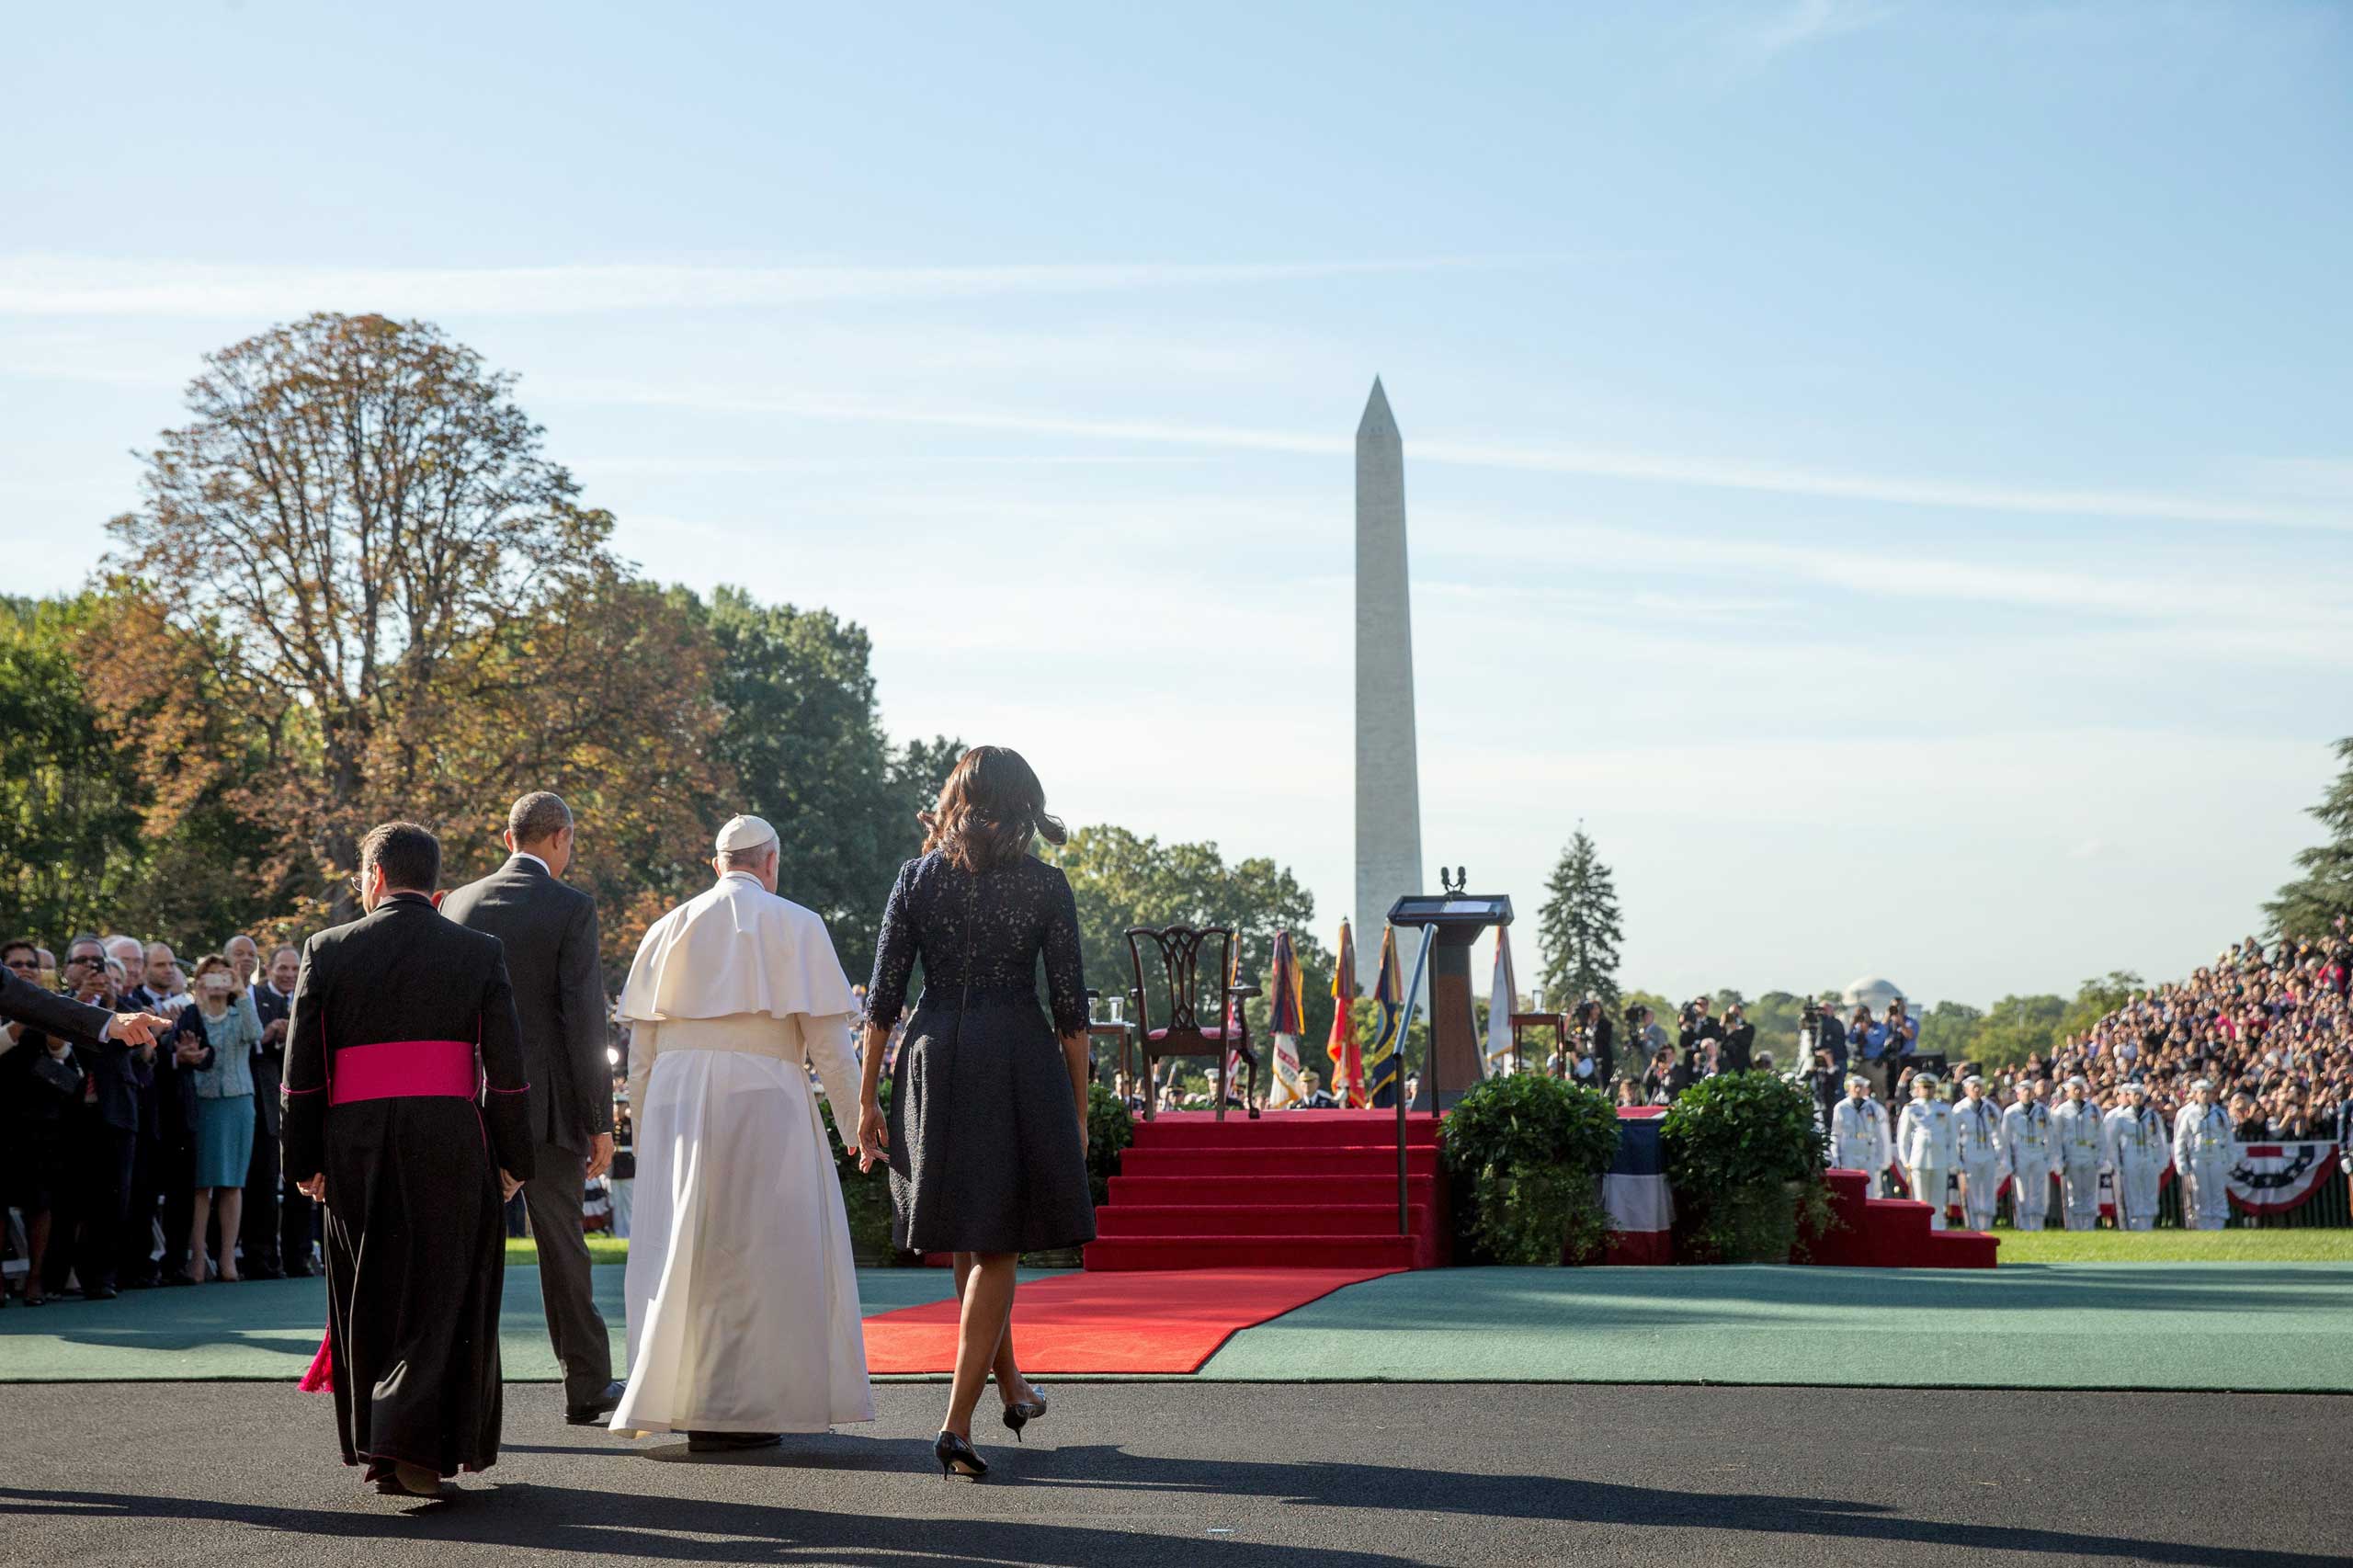 President Barack Obama and first lady Michelle Obama accompany Pope Francis to the stage during a state arrival ceremony, on Sept. 23, 2015, on the South Lawn of the White House in Washington.